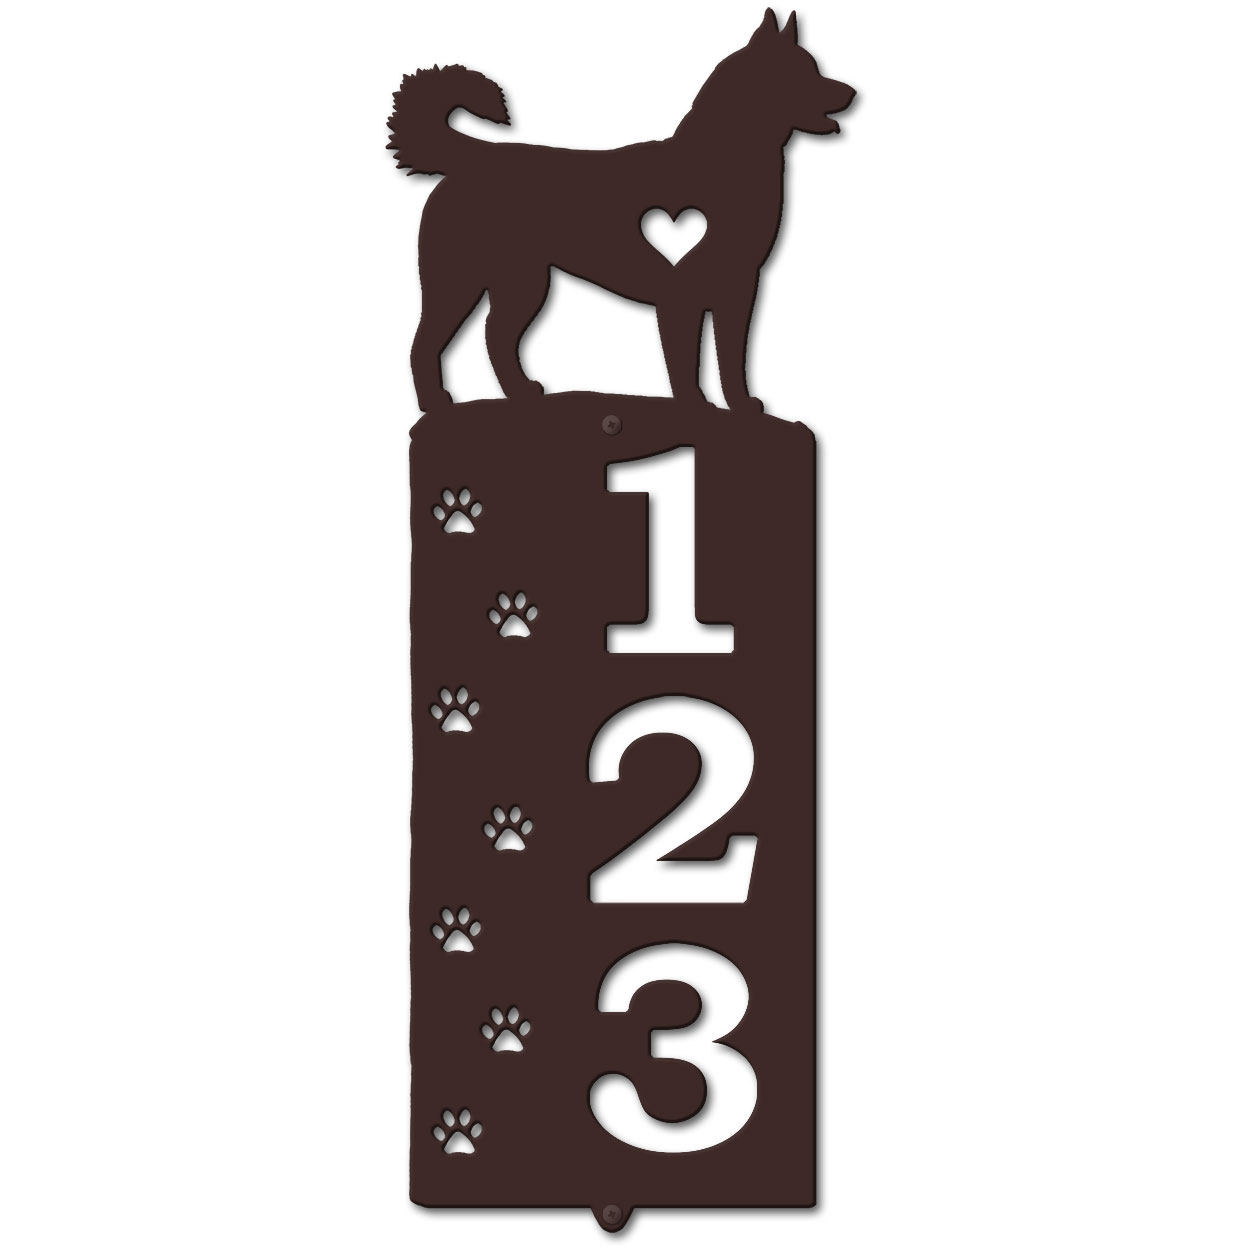 636243 - Husky Cut-Outs Three Digit Address Number Plaque - Choose Size and Color